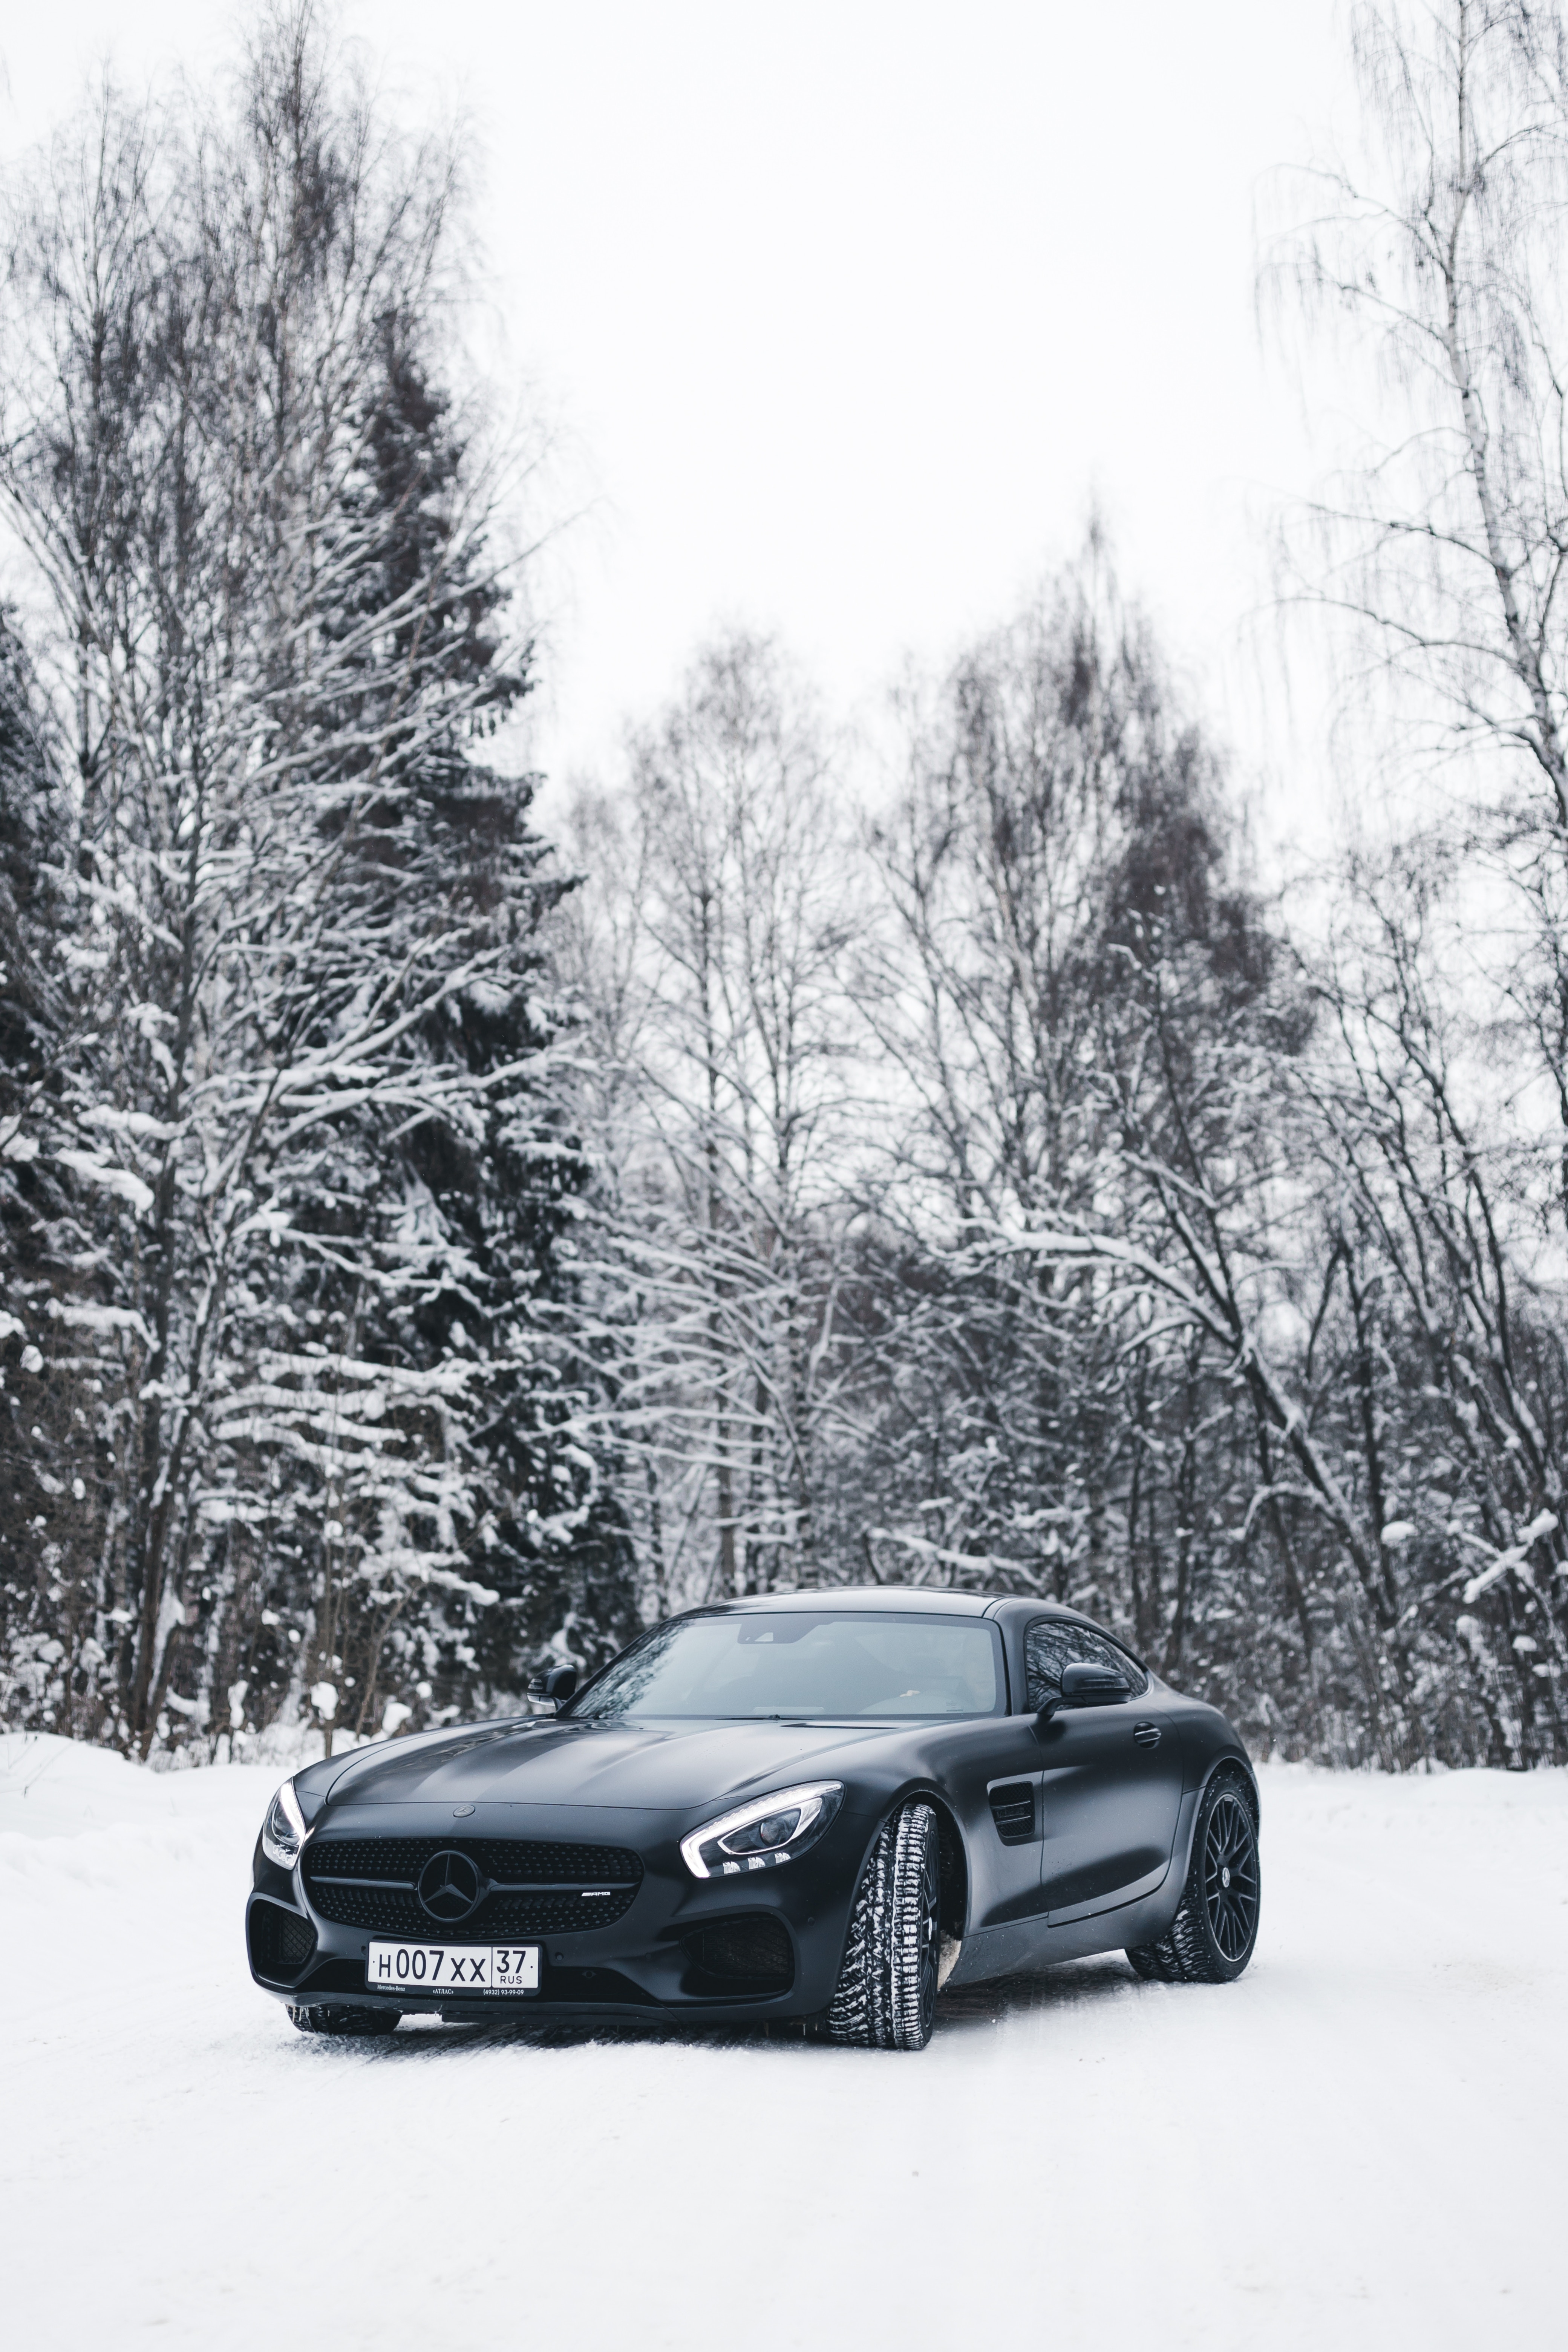 iPhone Wallpapers mercedes, snow, black, forest Cars